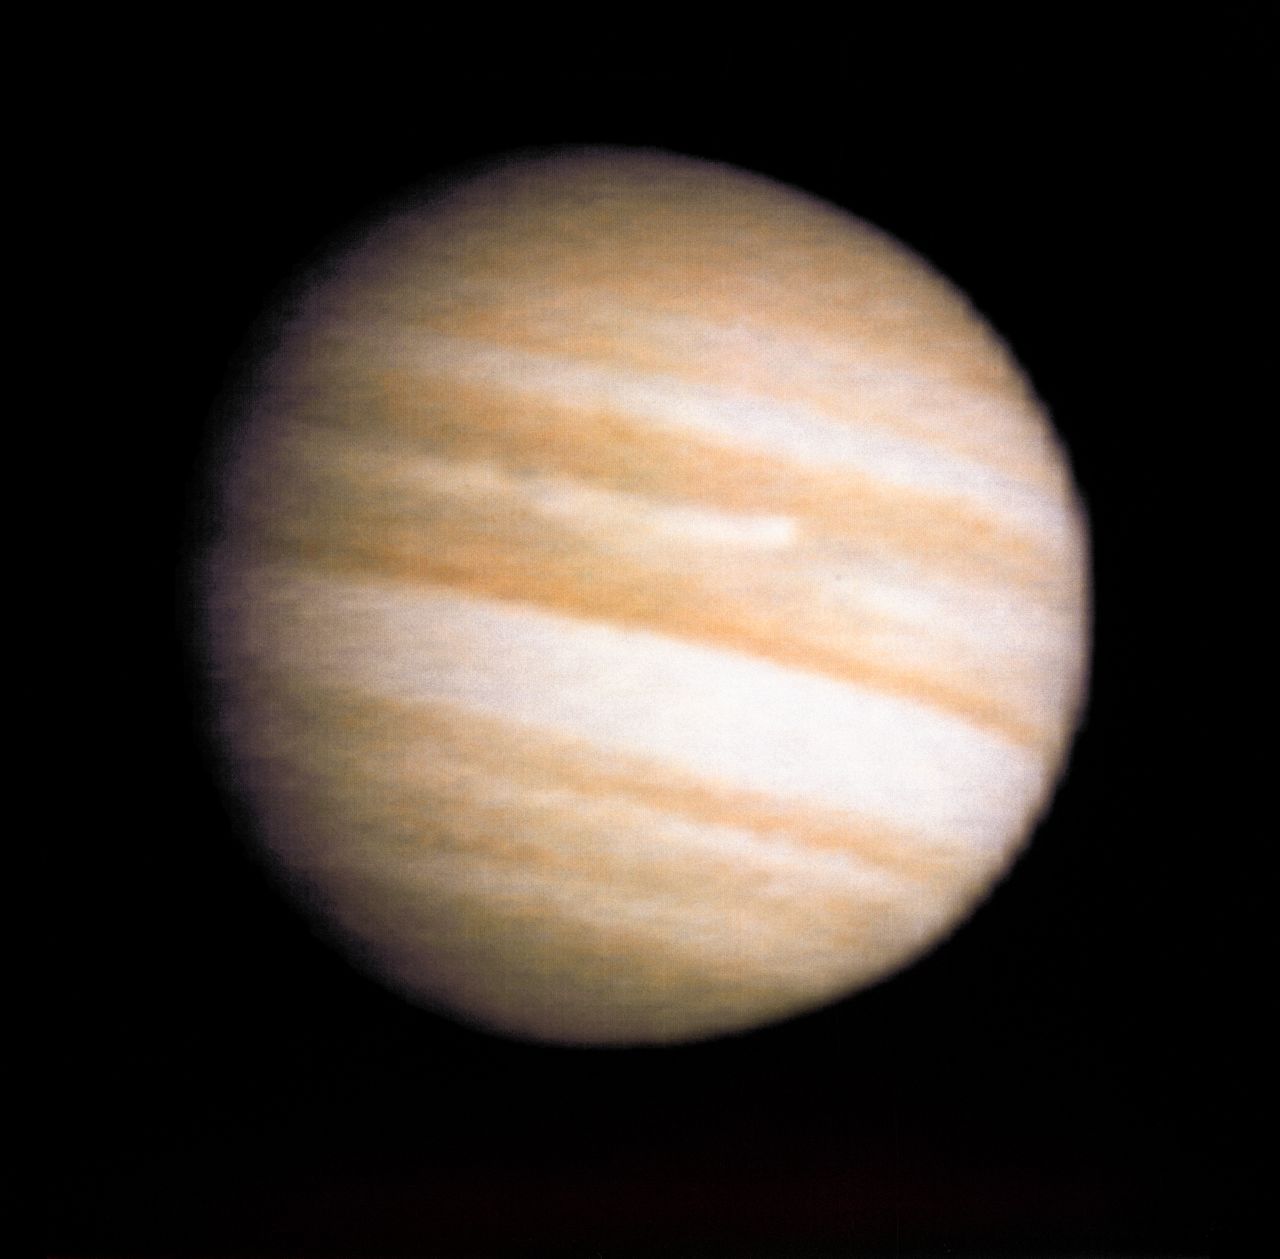 Voyager 2's view of Jupiter during the spacecraft's approach.